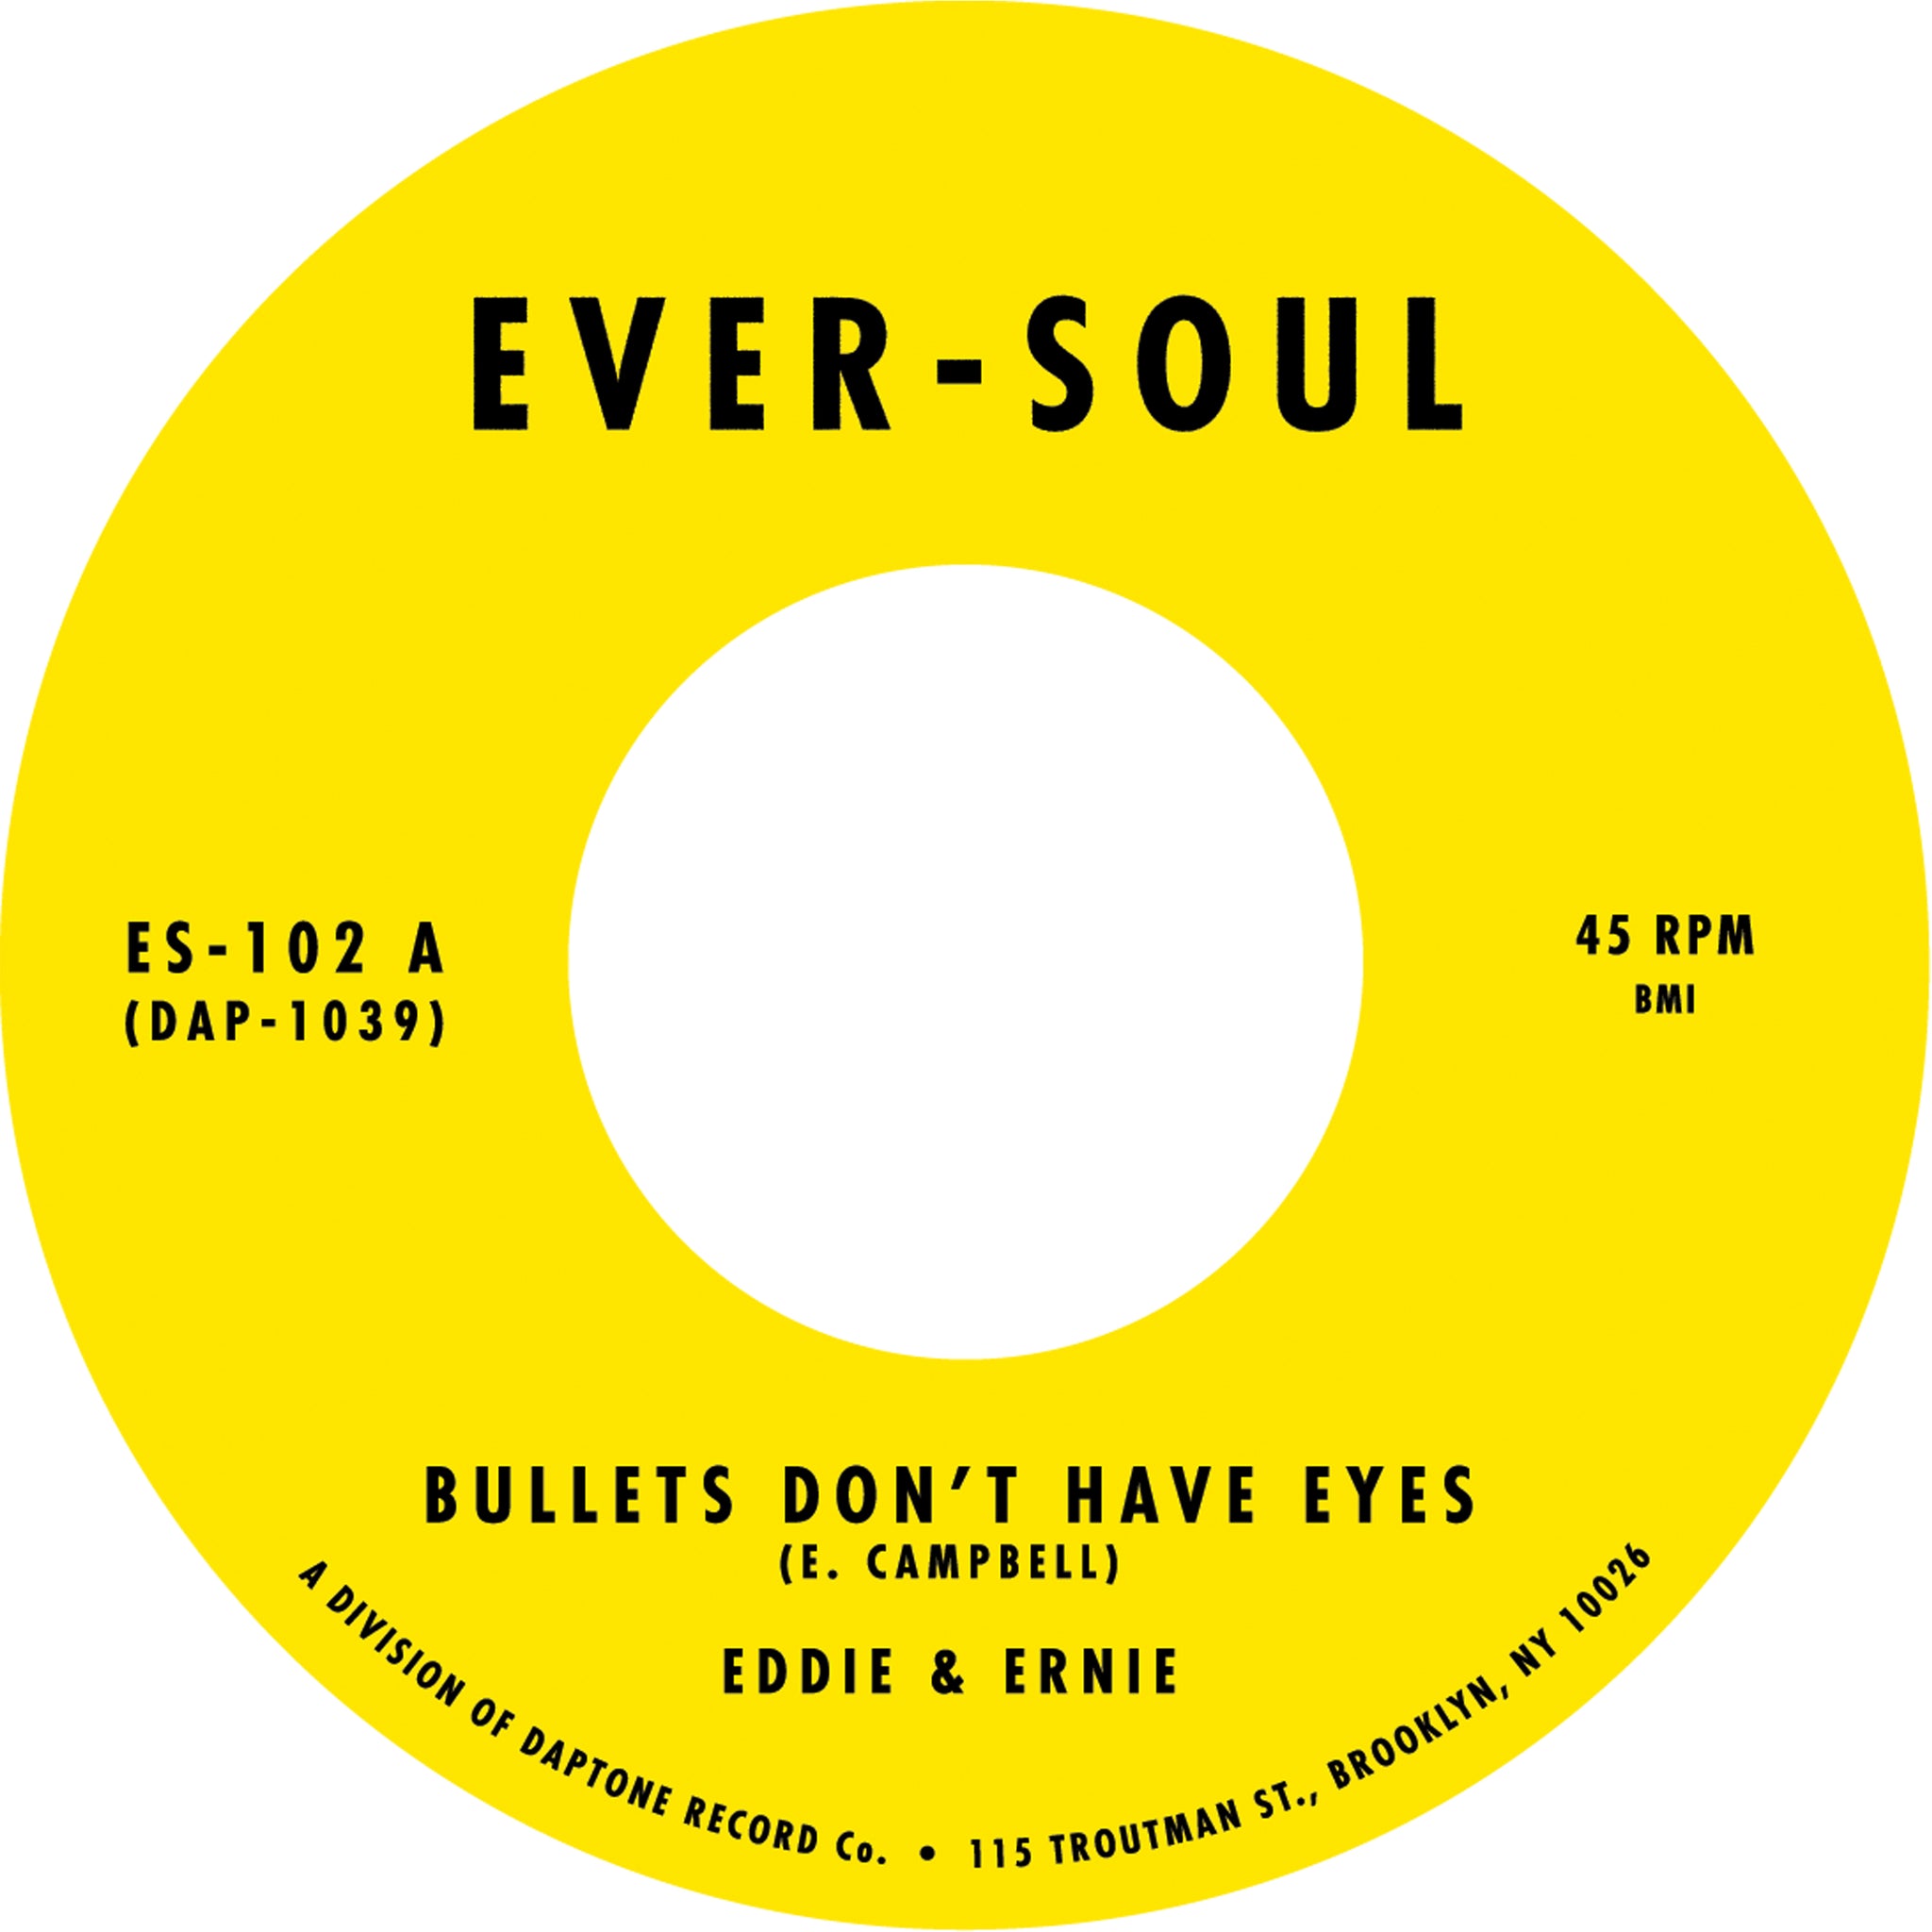 Eddie & Ernie - Bullets Don't Have Eyes b/w In These Tender Moments